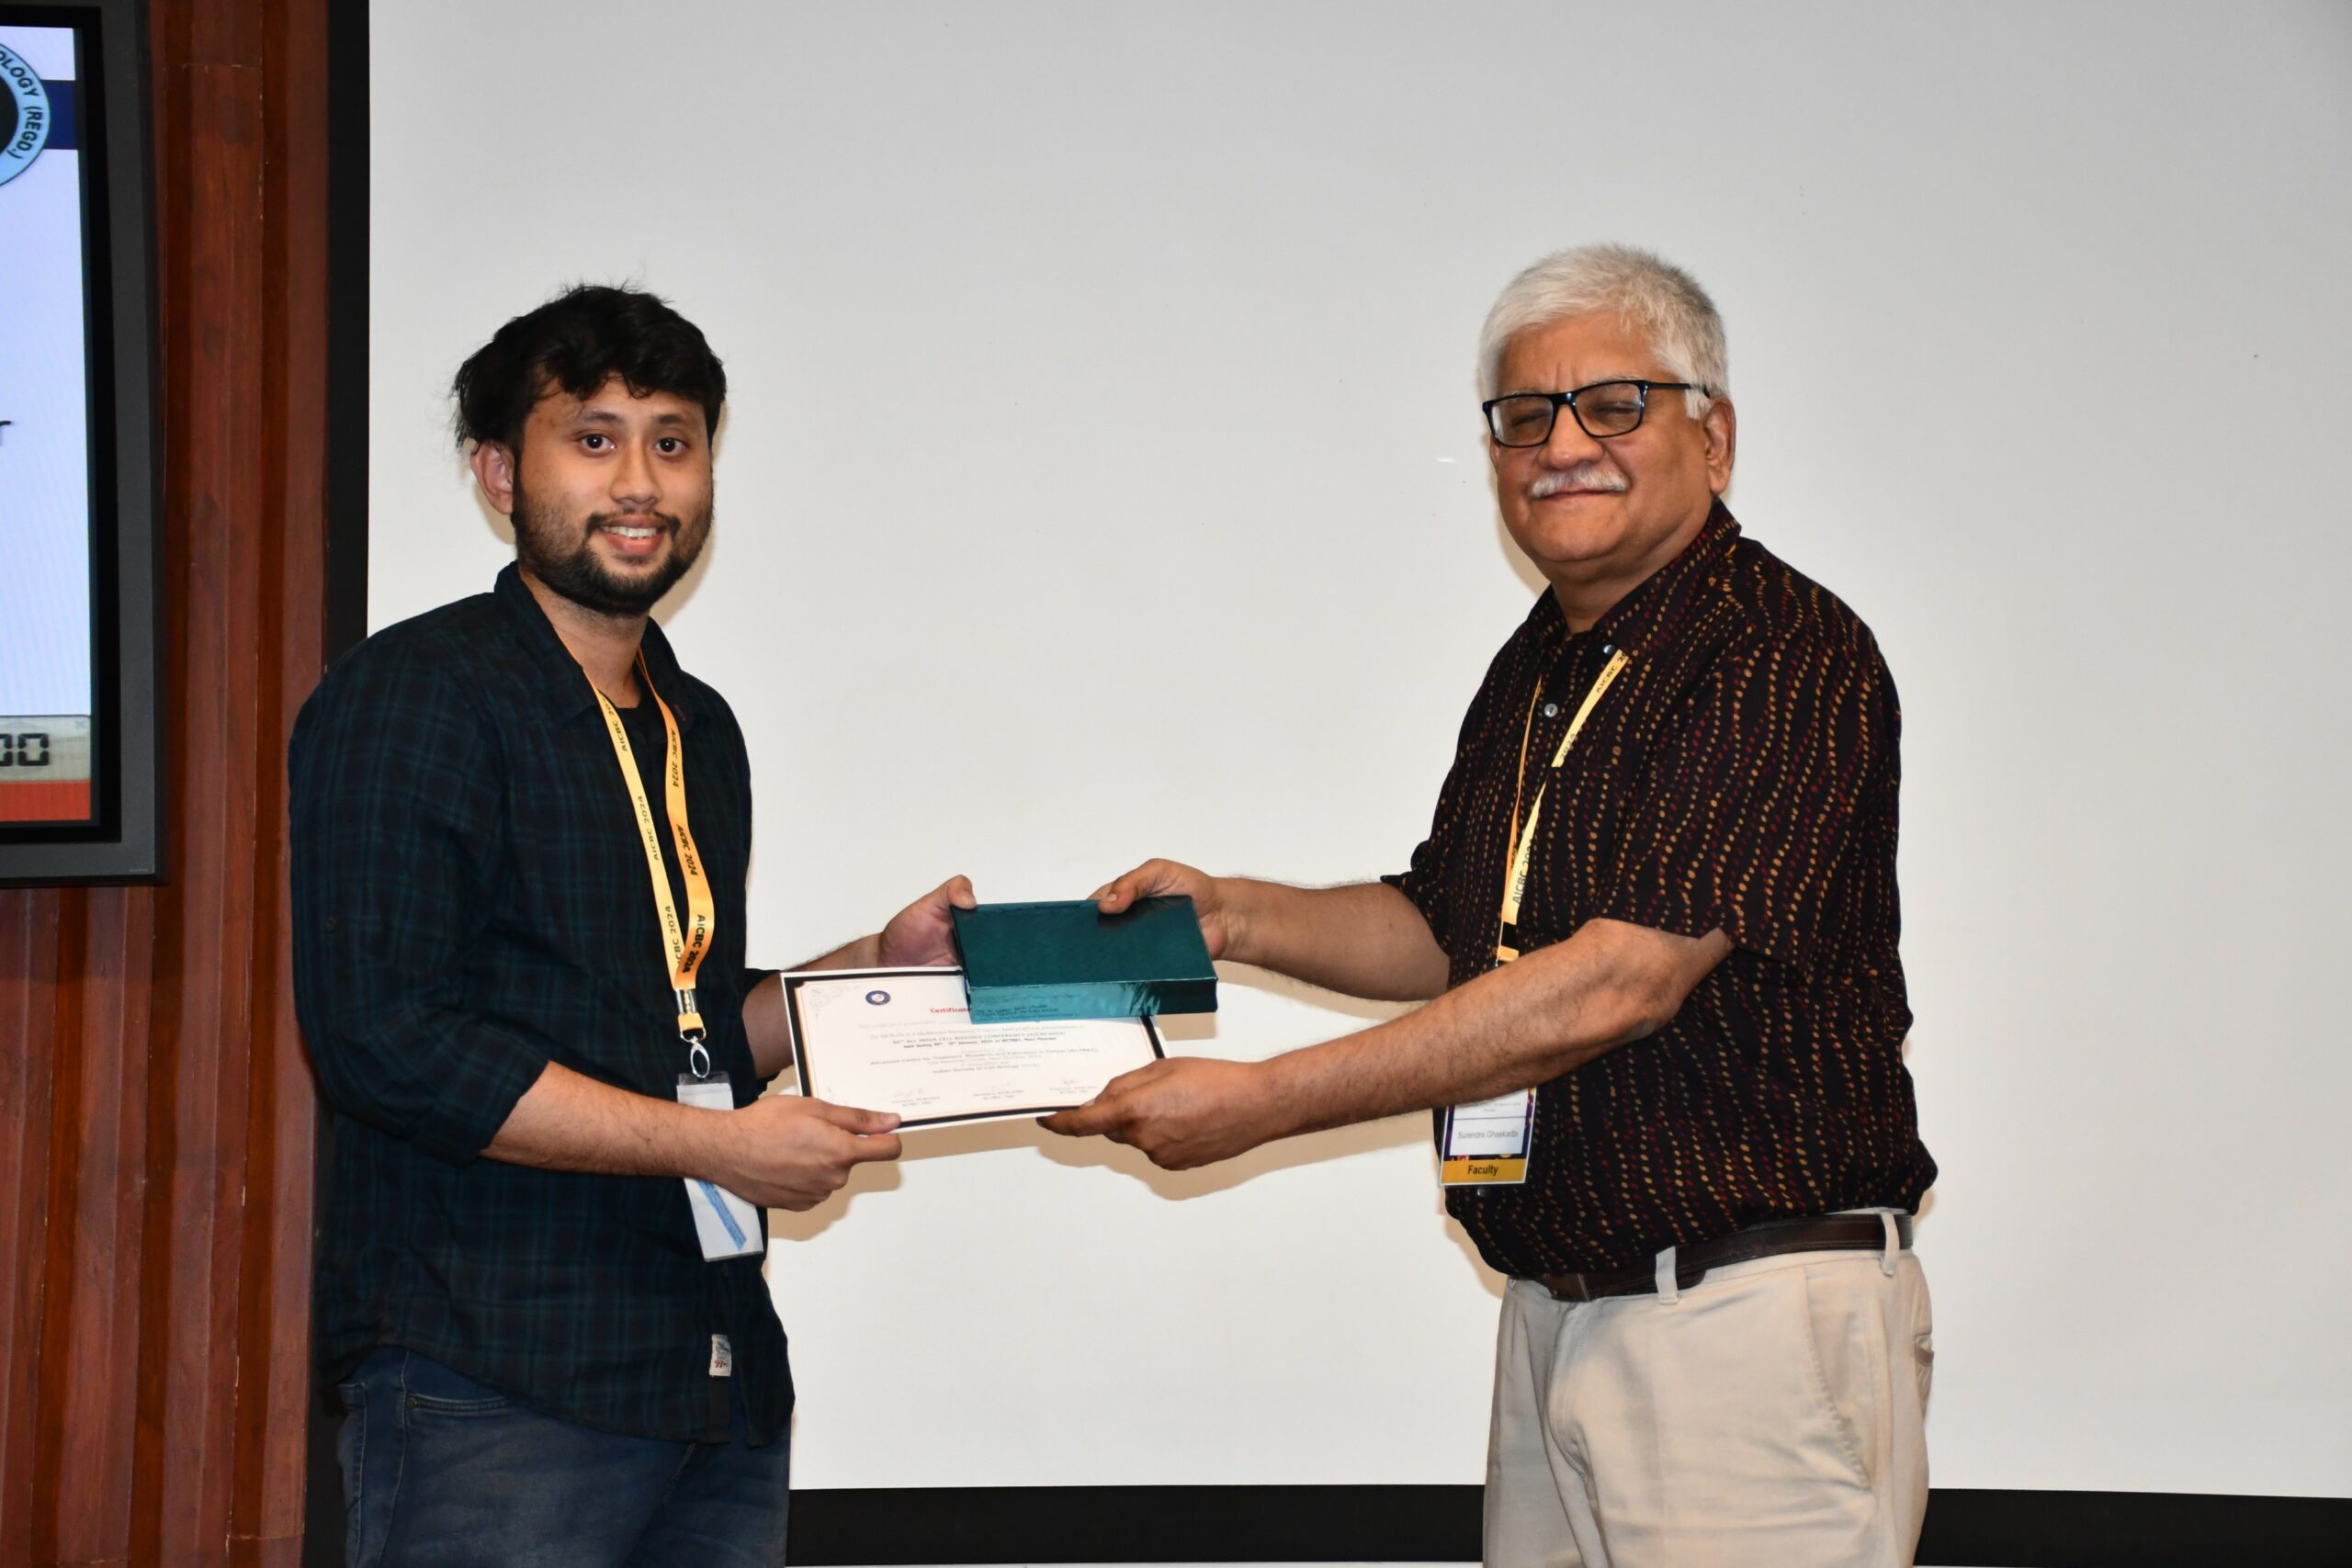 Mr. Sourav Ghosh was awarded the ISCB-DR A S Mukherjee Memorial Prize for the best platform presentation at 46th All India Cell Biology Conference 2024 (AICBC2024). Sourav received the award from Prof. Surendra Ghaskadbi (President, Indian Society of Cell Biology).